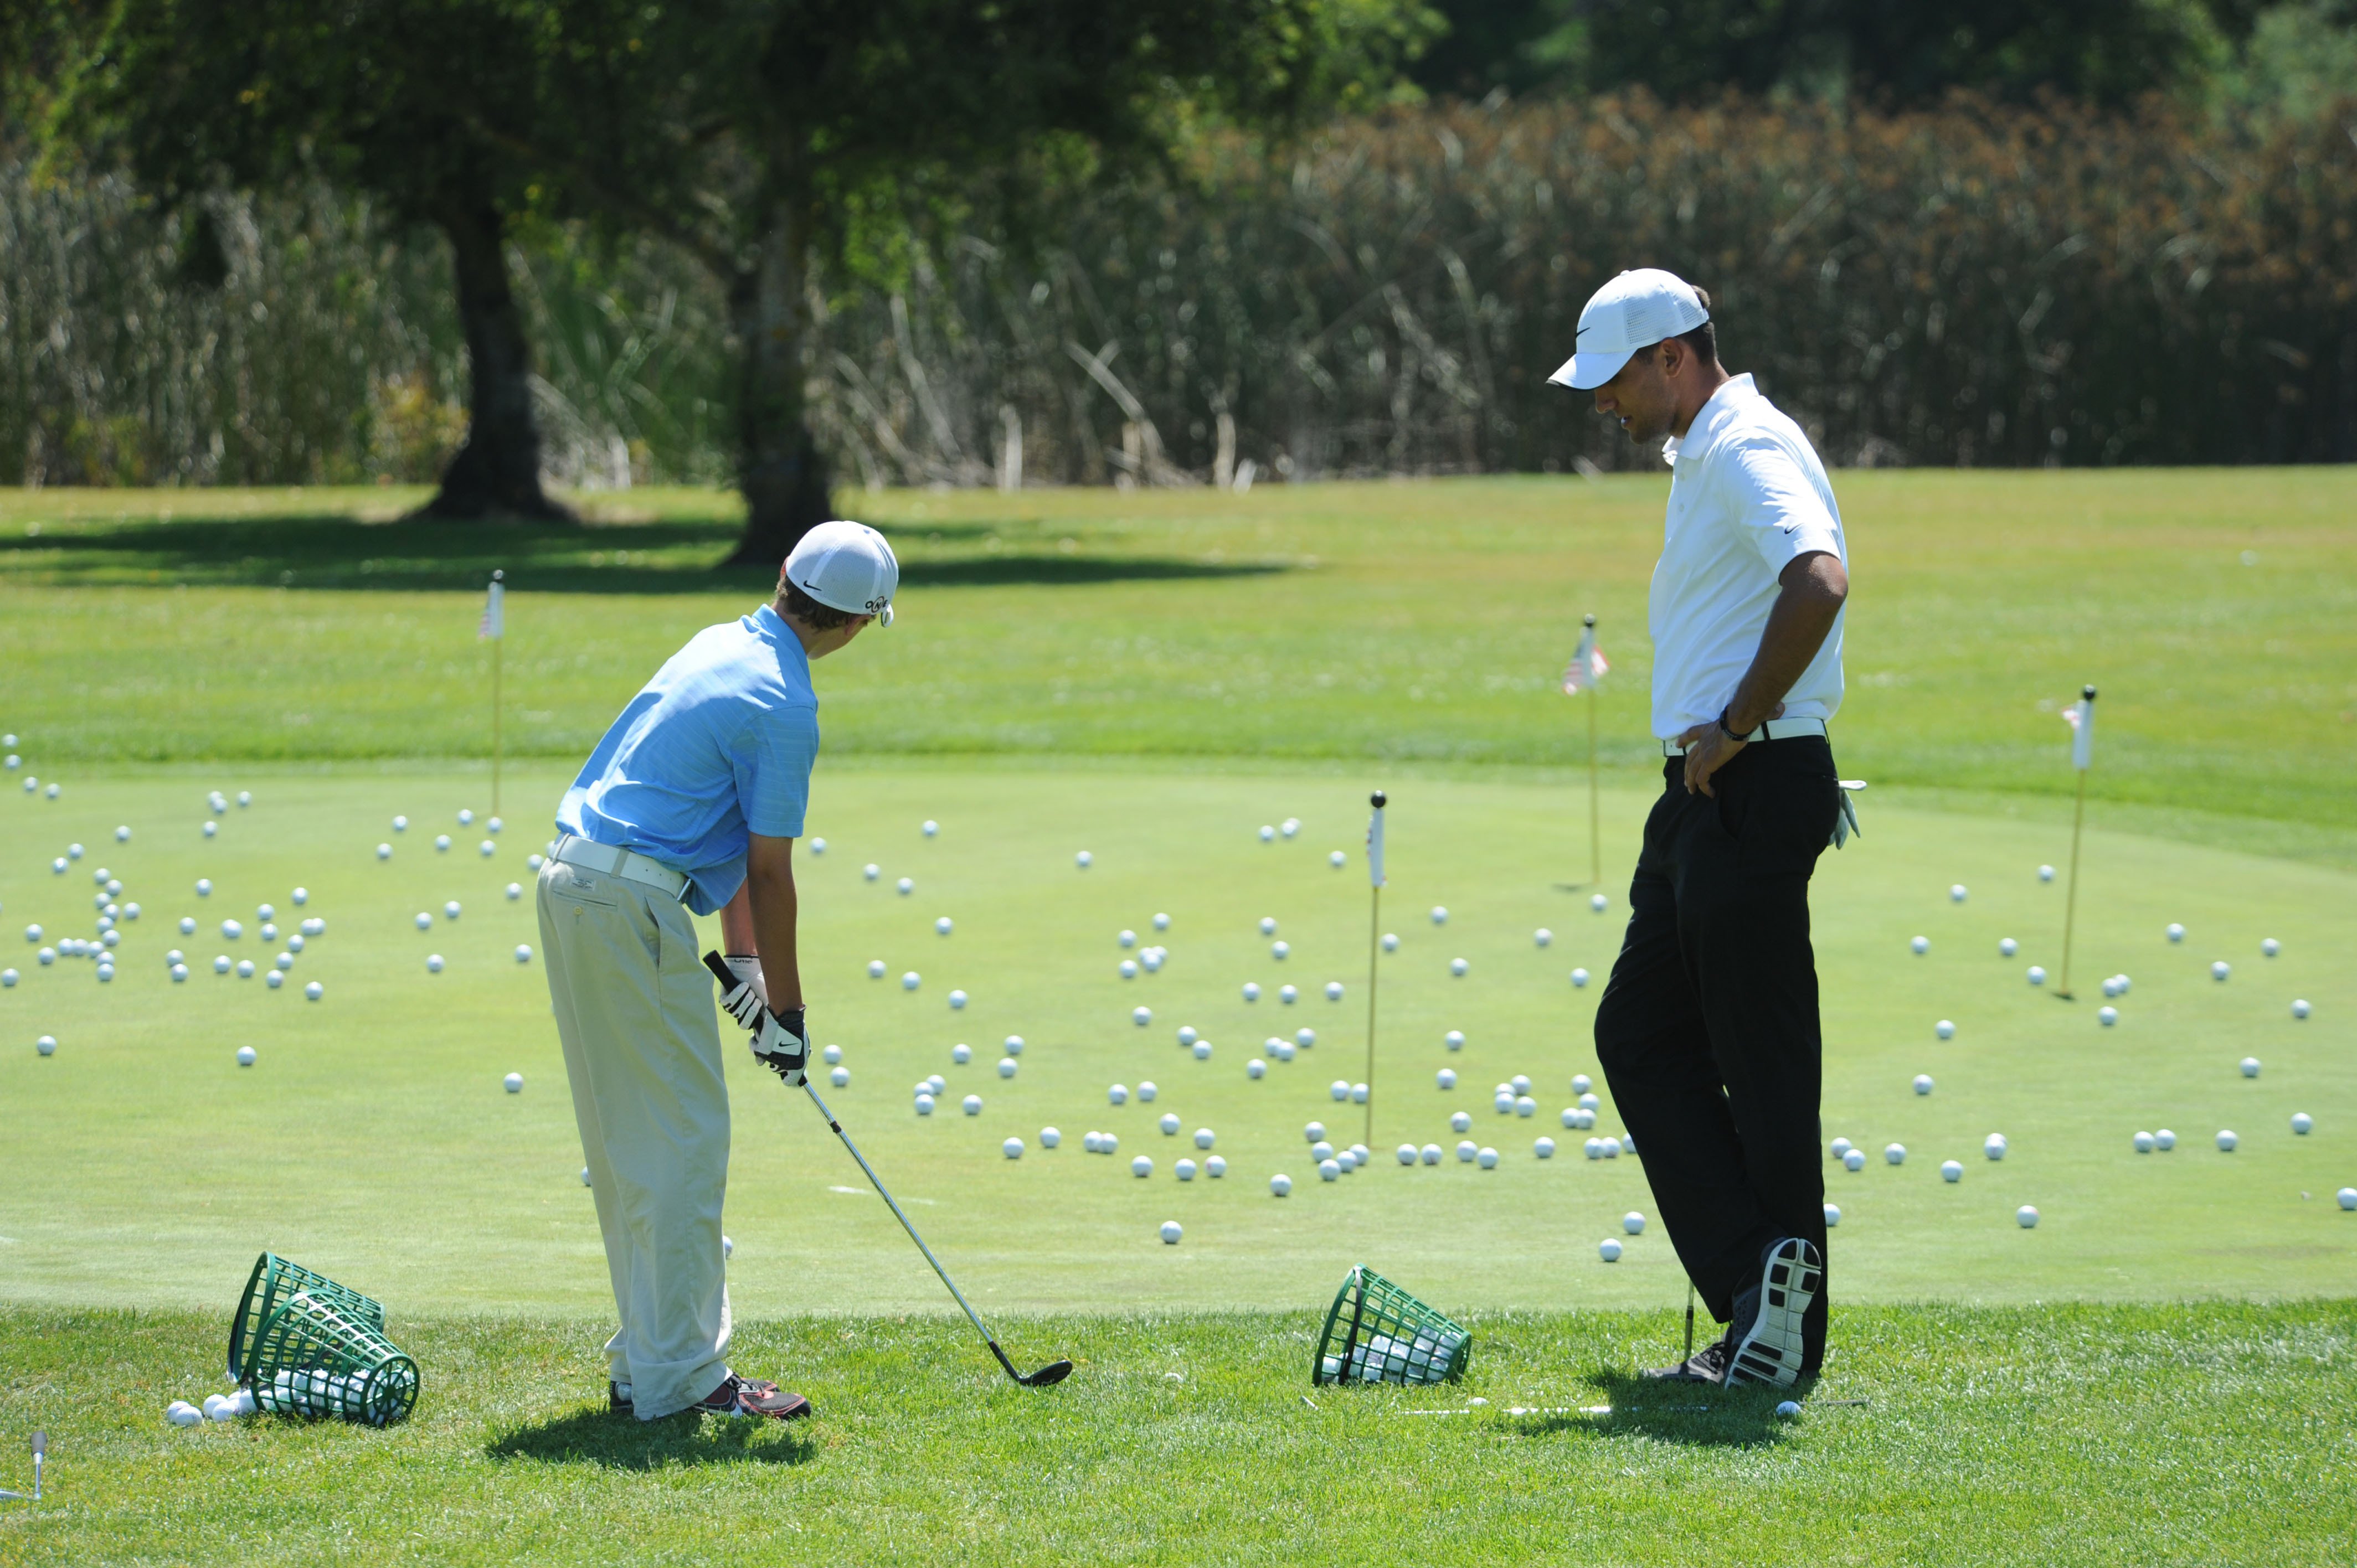 Nike Golf Camps Come to Central Virginia's Wintergreen - Golf